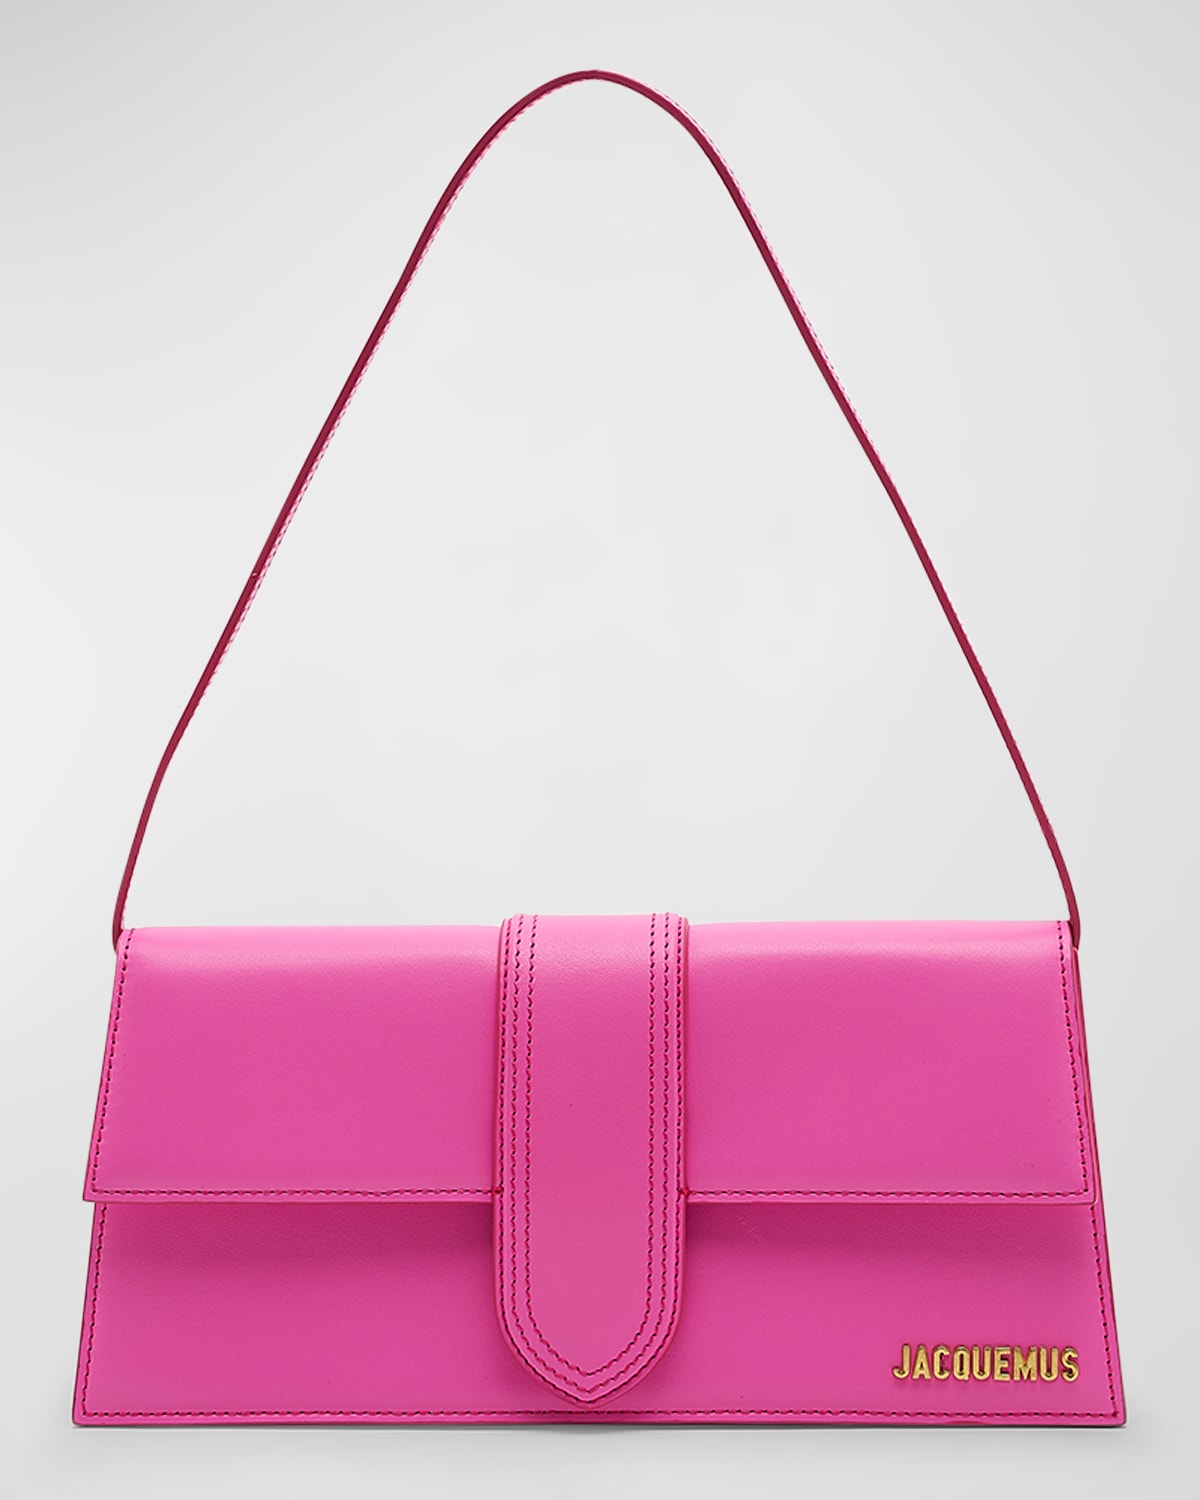 Jacquemus Le Bambino Long Leather Shoulder Bag In Neon Pink